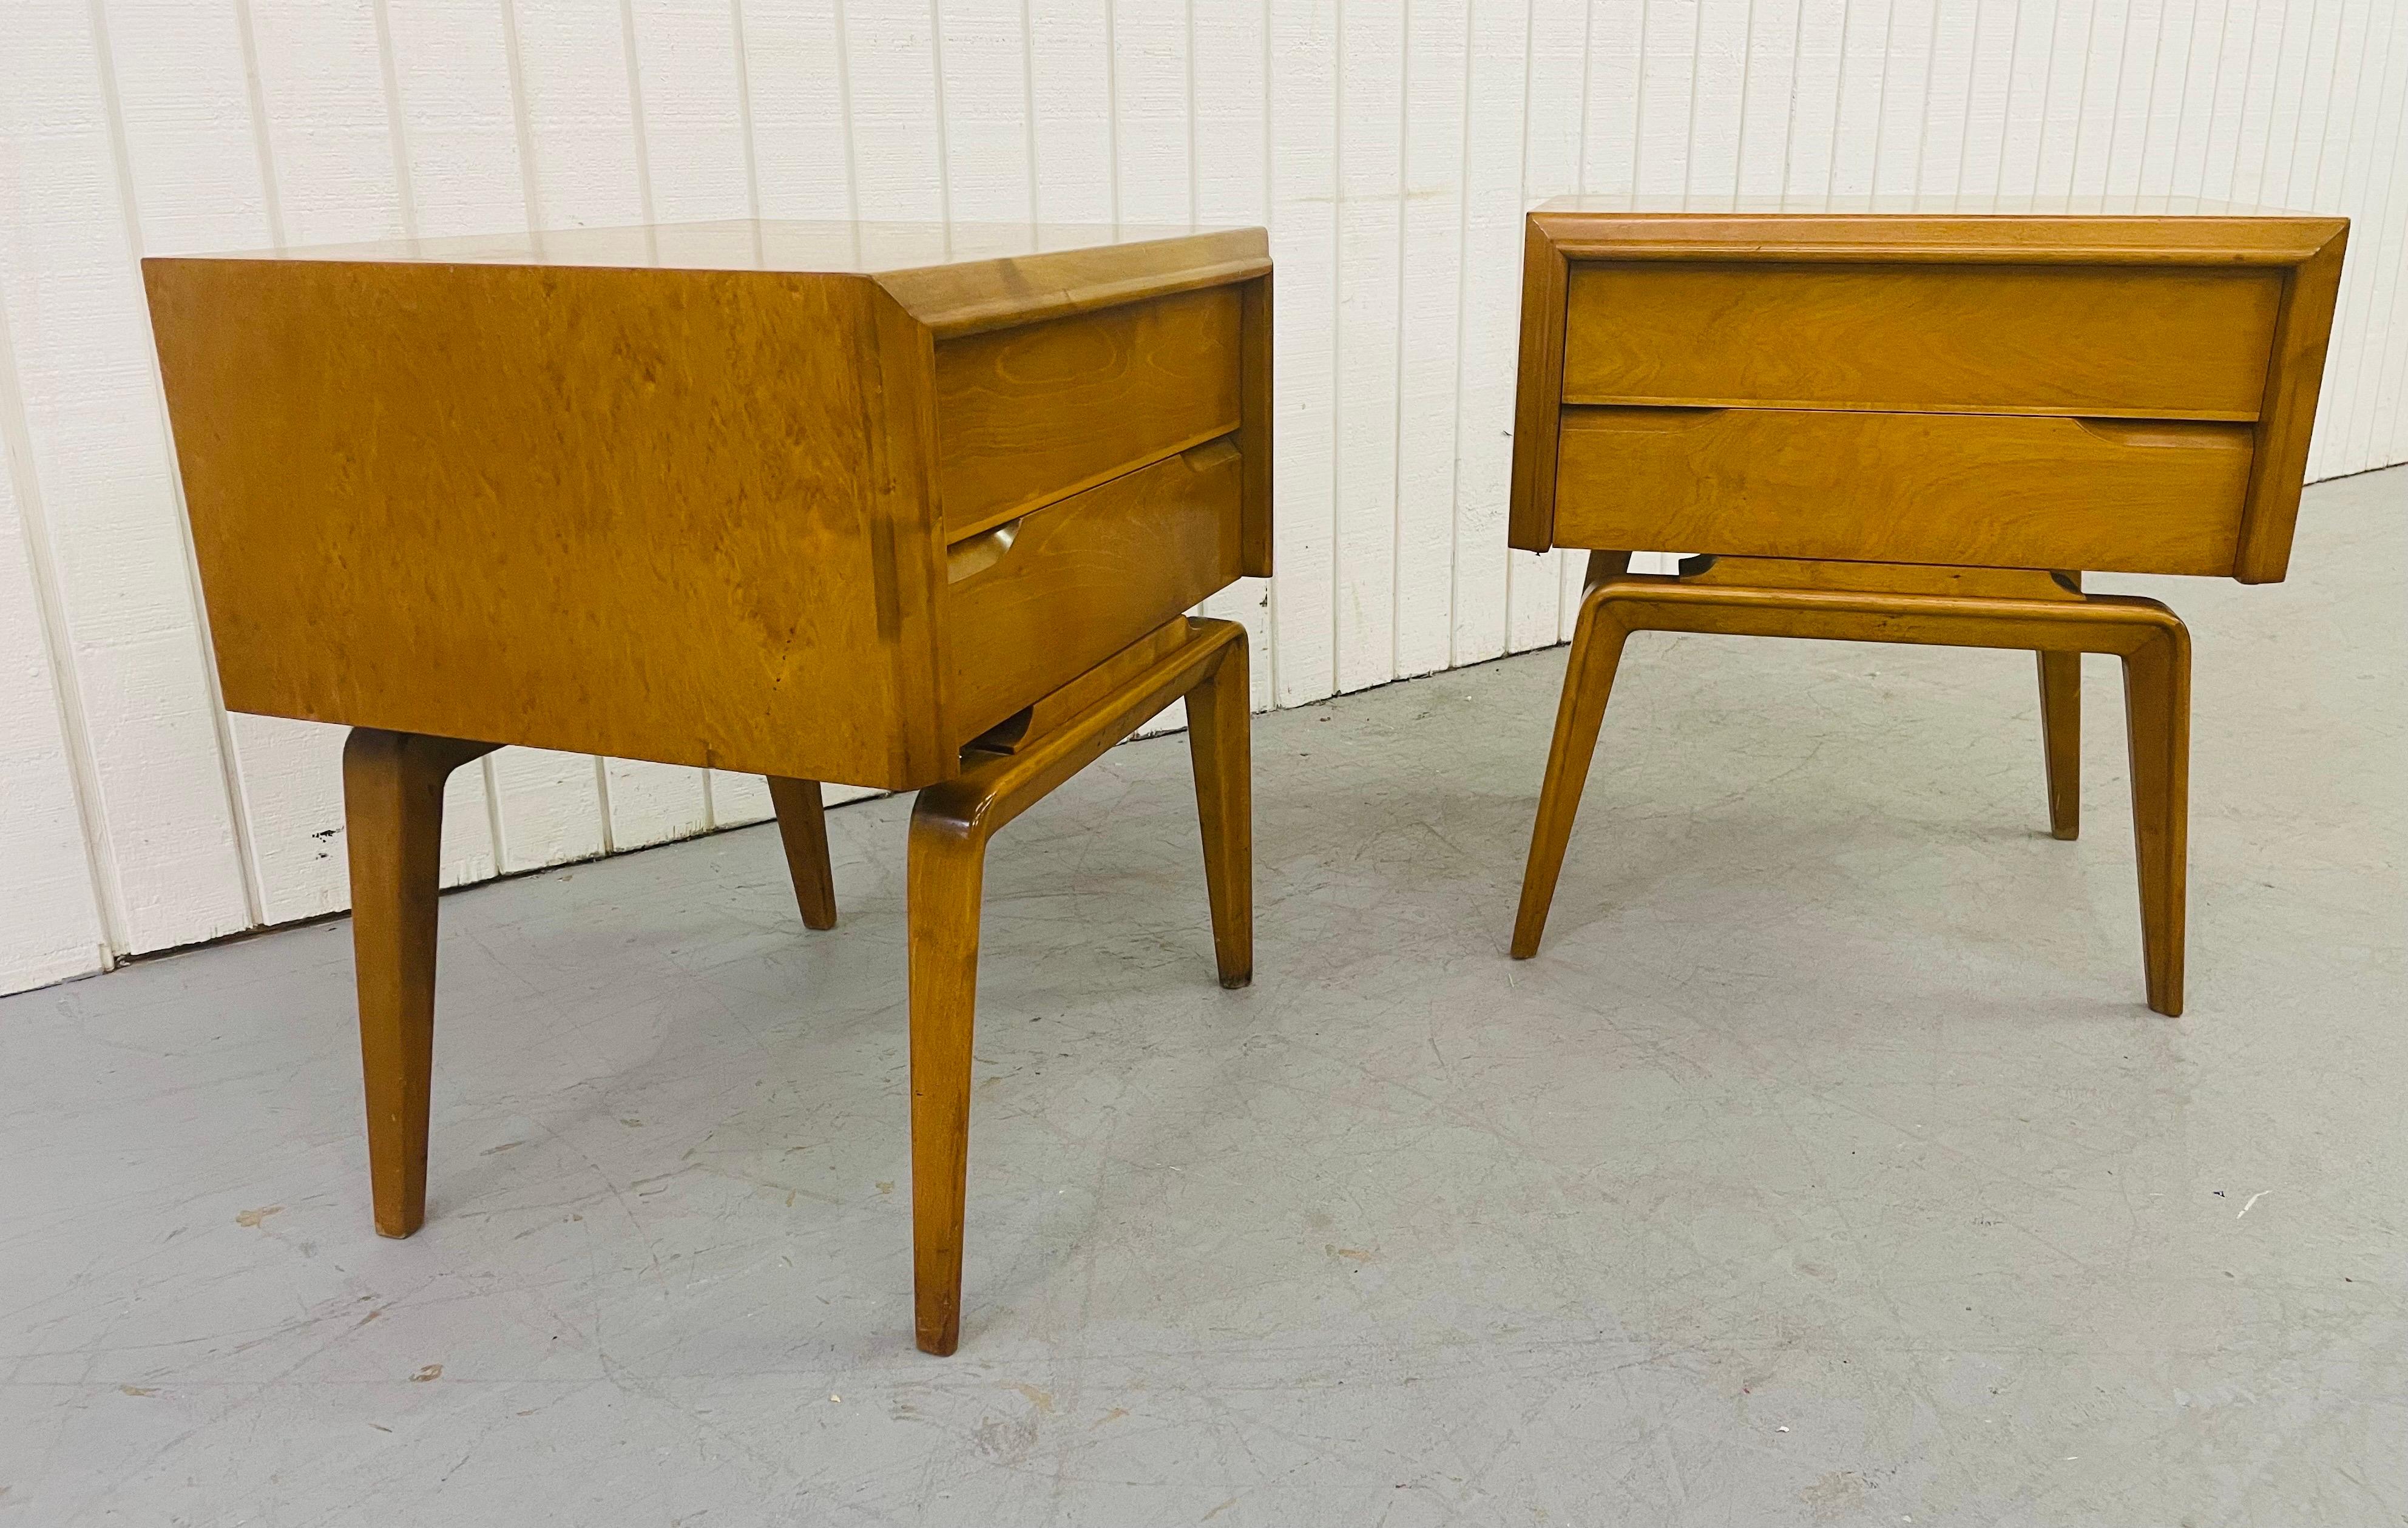 This listing is for a pair of mid-century Edmond Spence nightstands. Featuring exceptional tall legs, two drawers for storage, and a beautiful champagne blonde finish.